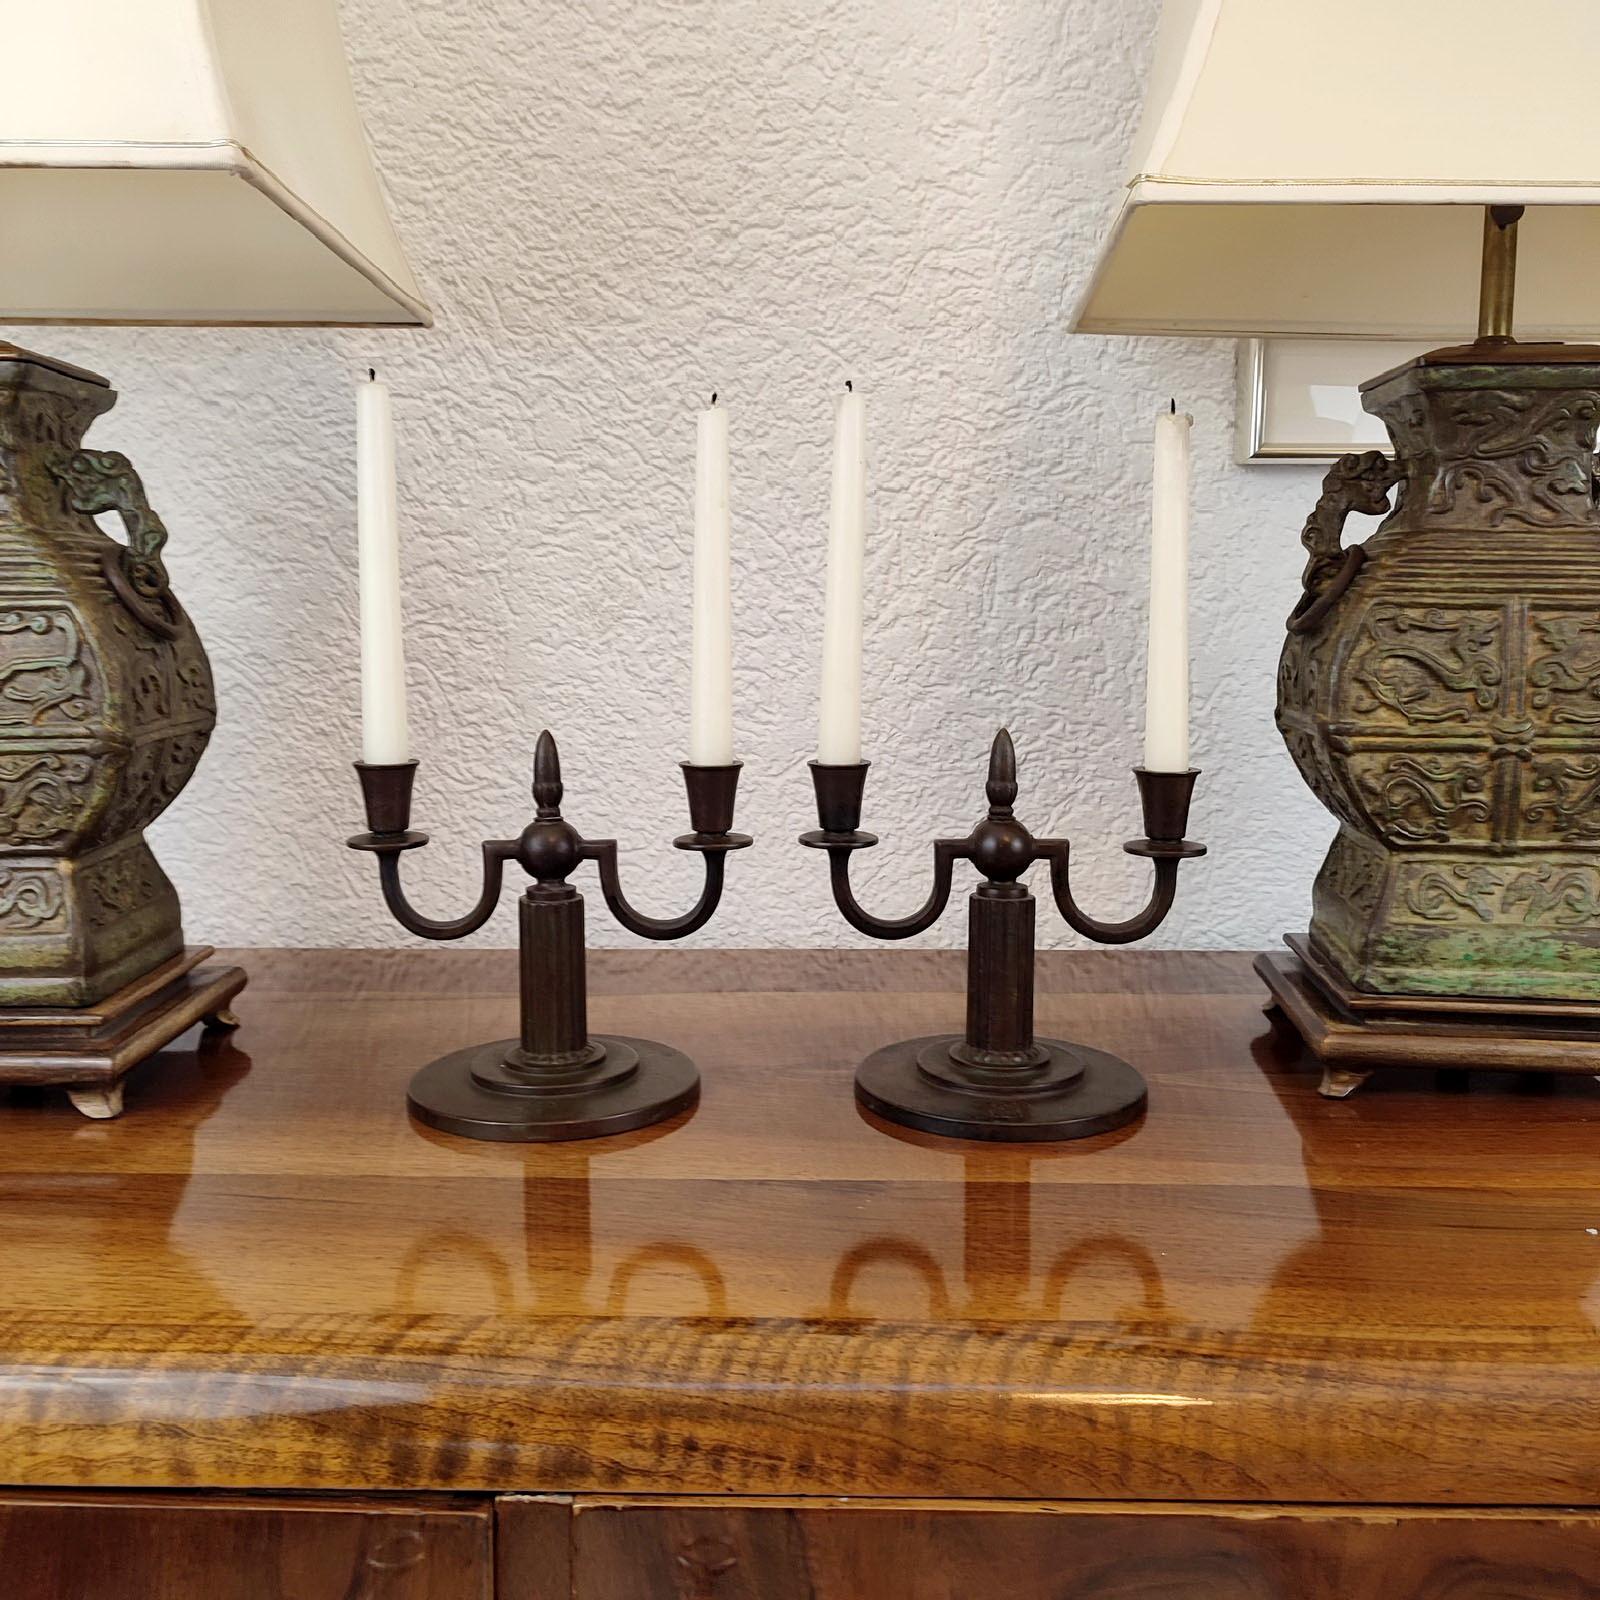 A pair of patinated bronze candle holders from Guldsmedsaktiebolaget - GAB, design attributed to Jacob Ängman. Early 1930s. Fluted stem on a round double stepped base, with two lights of 2cm. Monogrammed 